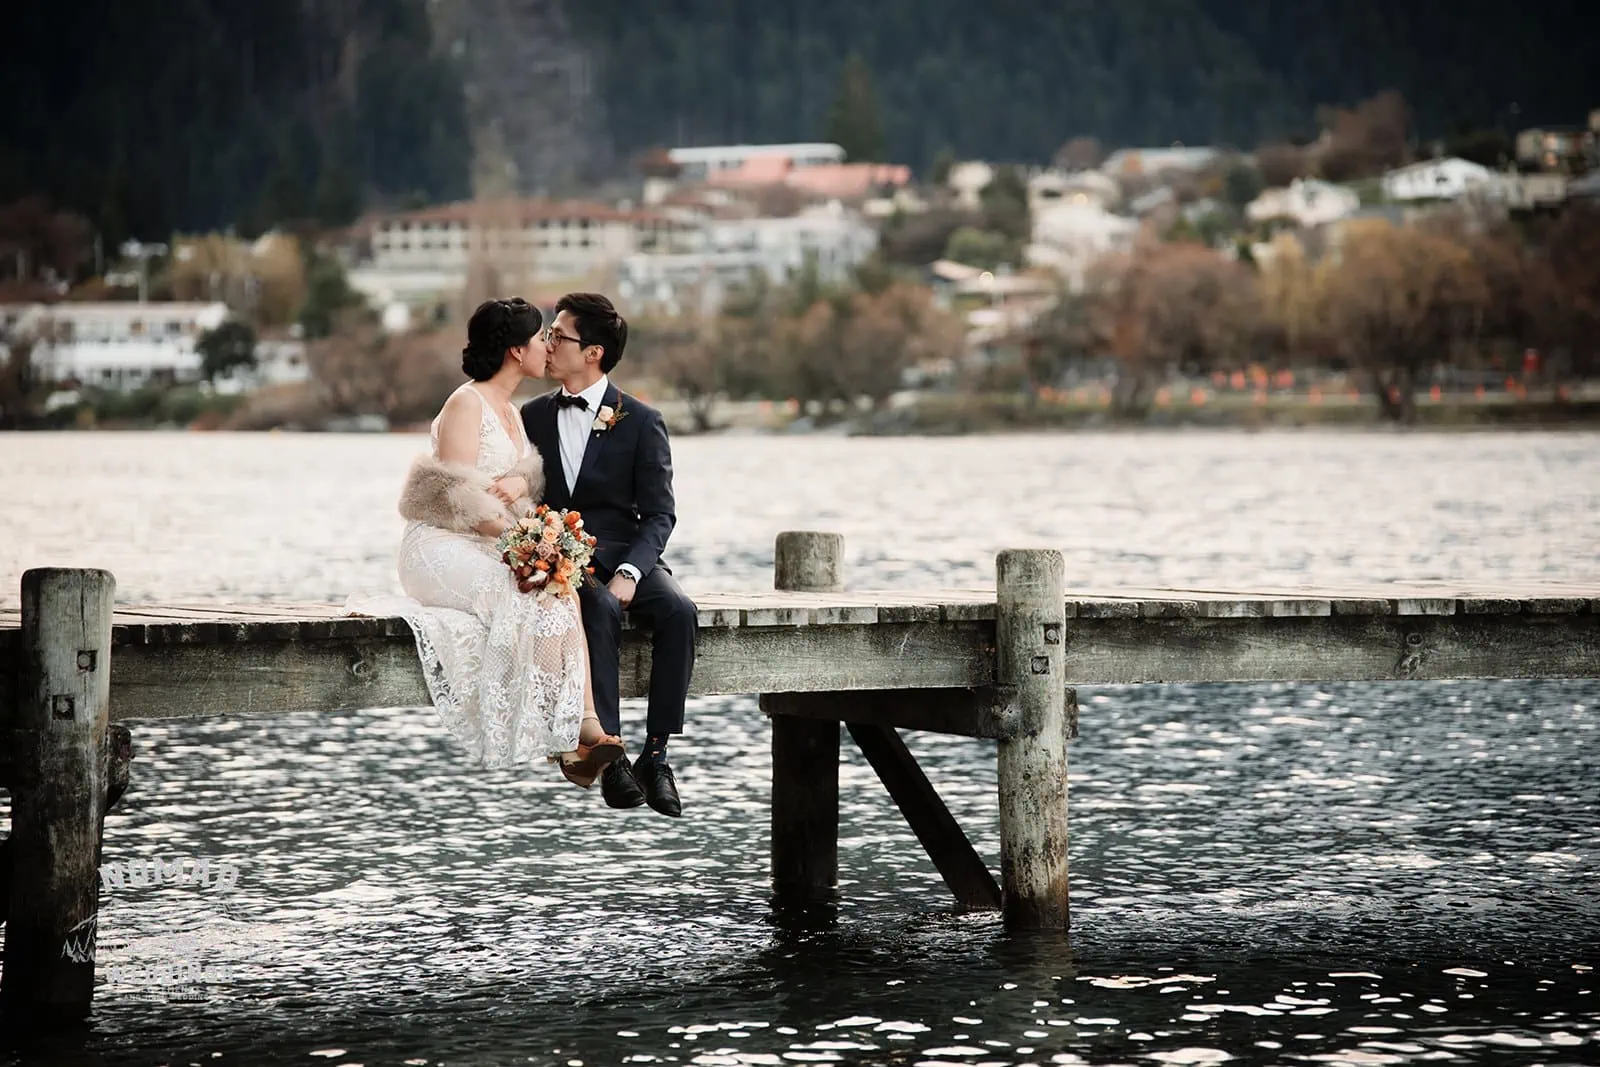 A pre-wedding shoot of Joanna and Tony, a bride and groom, sharing a romantic kiss on a dock in Queenstown, New Zealand.